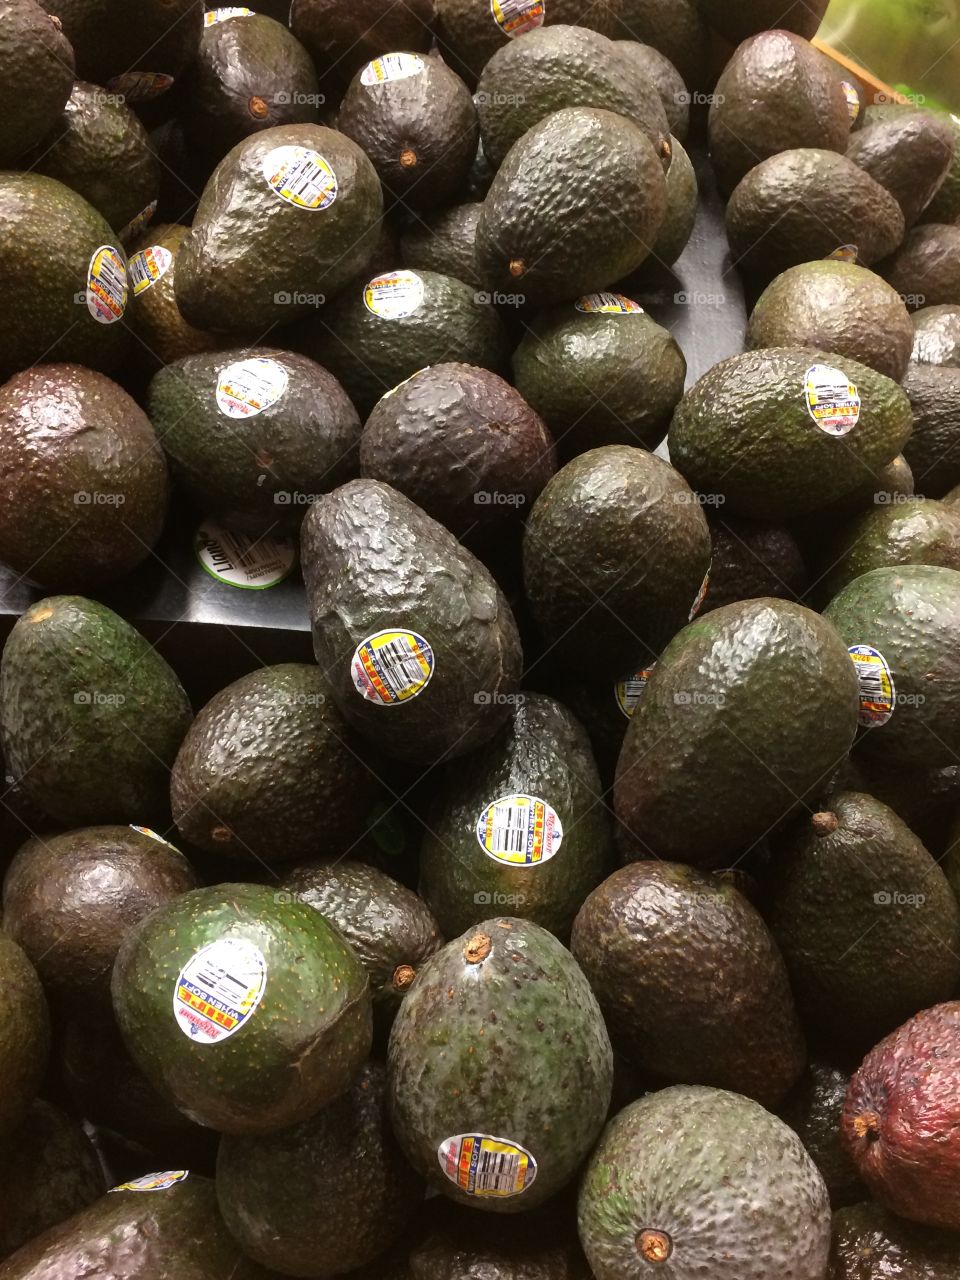 Avocados waiting to be turned into guacamole.